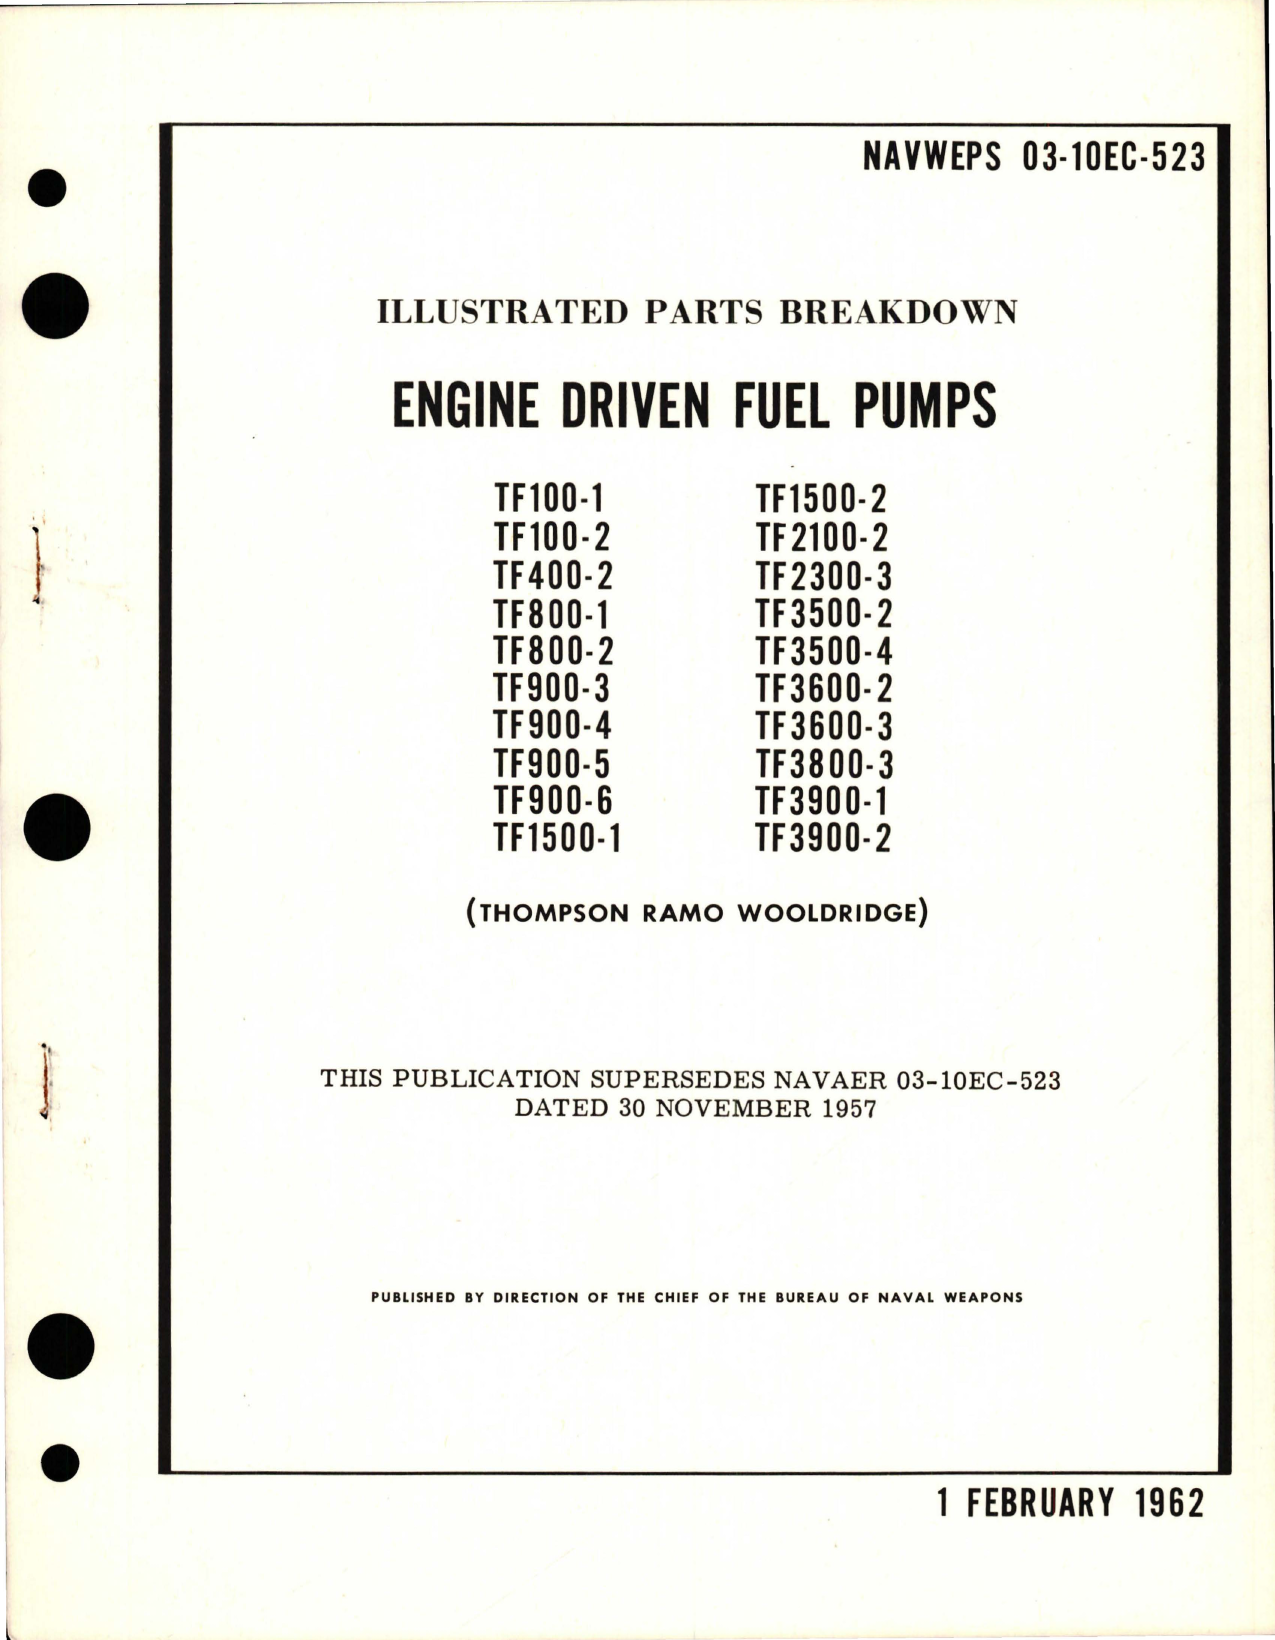 Sample page 1 from AirCorps Library document: Overhaul Instructions for Water Regulators 